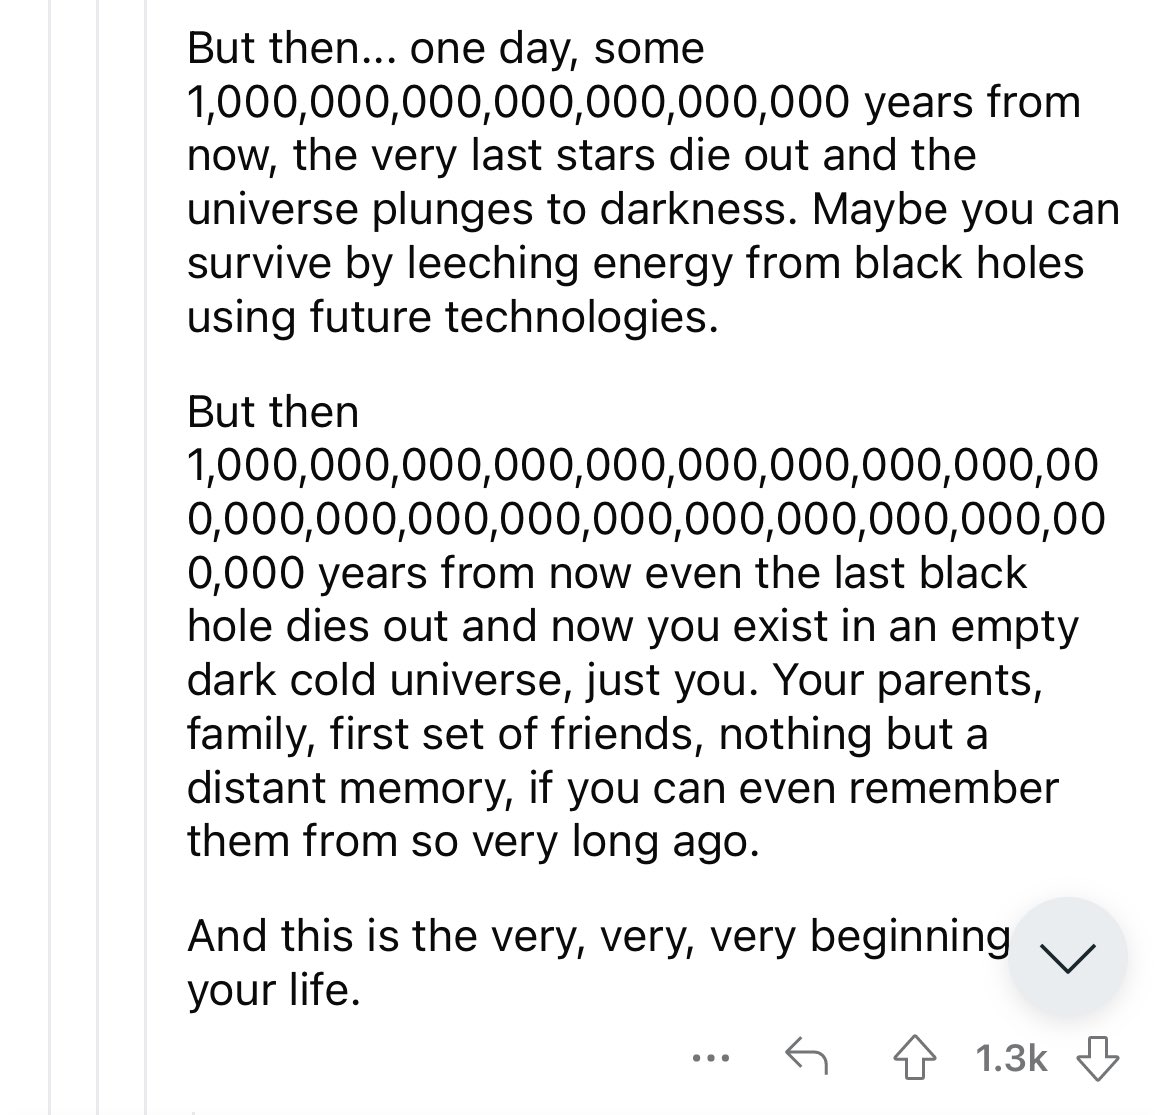 This person describing what immortality would actually be like is genuinely the best short horror story I’ve ever read